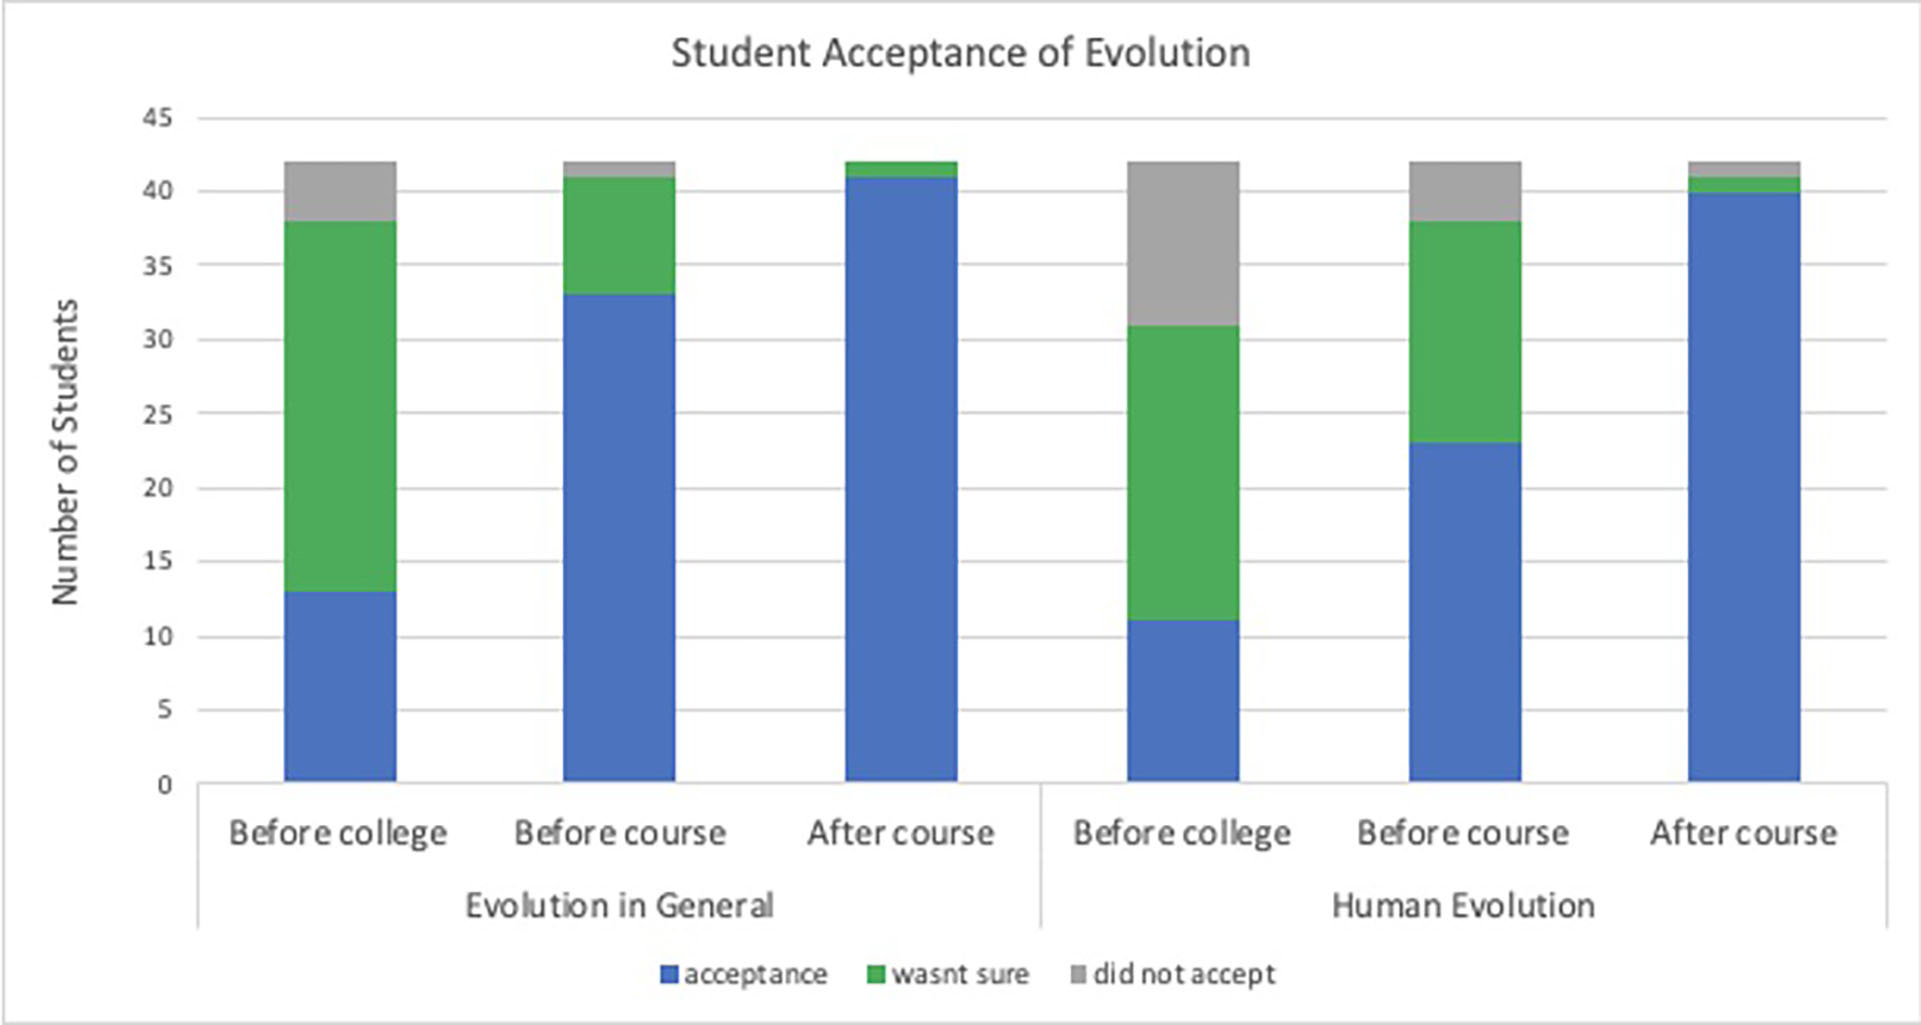 Student responses for level of acceptance of evolution at three distinct time periods for both evolution in general and human evolution. Responses were recorded for attitudes before college, before the course, and after the course.